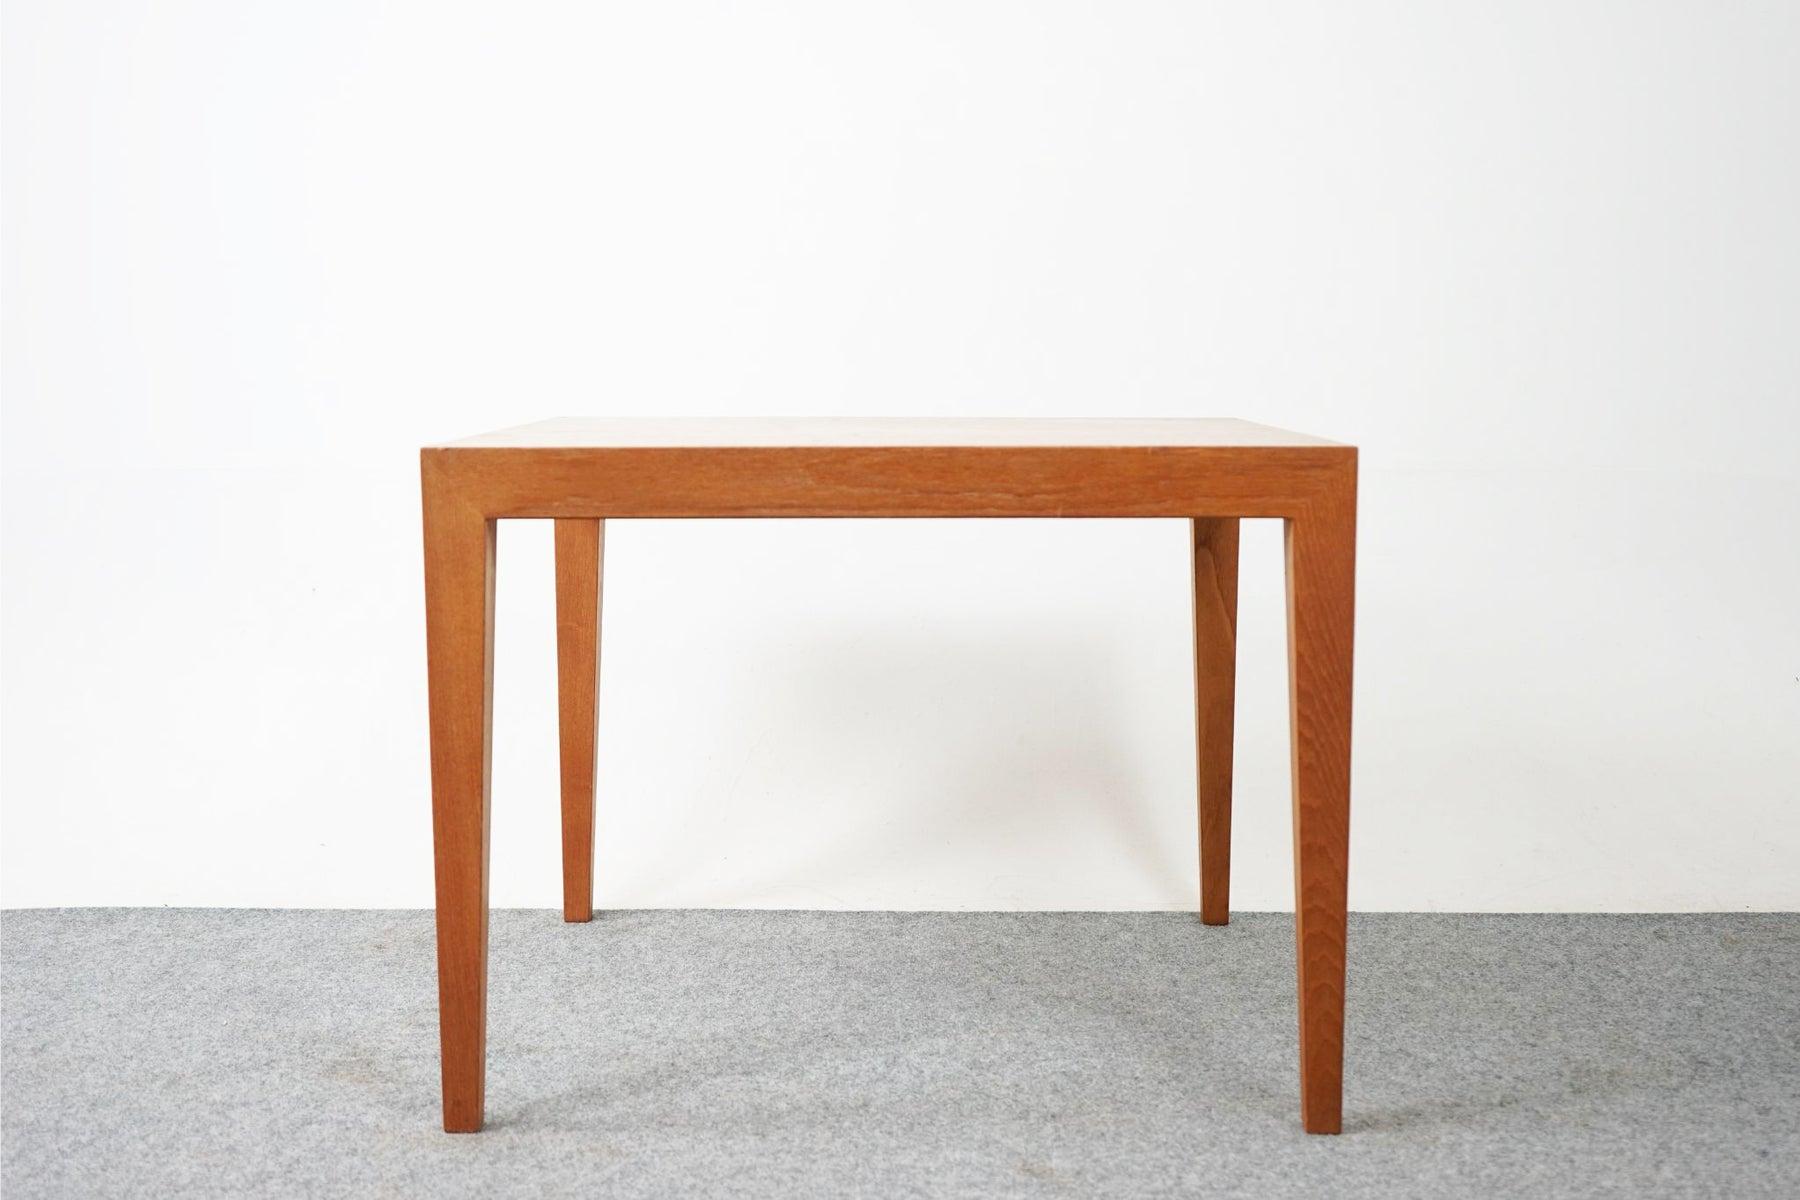 Oak Danish modern side table, by Severin Hansen for Haslev, circa 1960's. This compact yet highly functional table pairs perfectly with lounge chairs, loveseats, clean design with sharp angles, a light modern feel!

Unrestored condition, showing